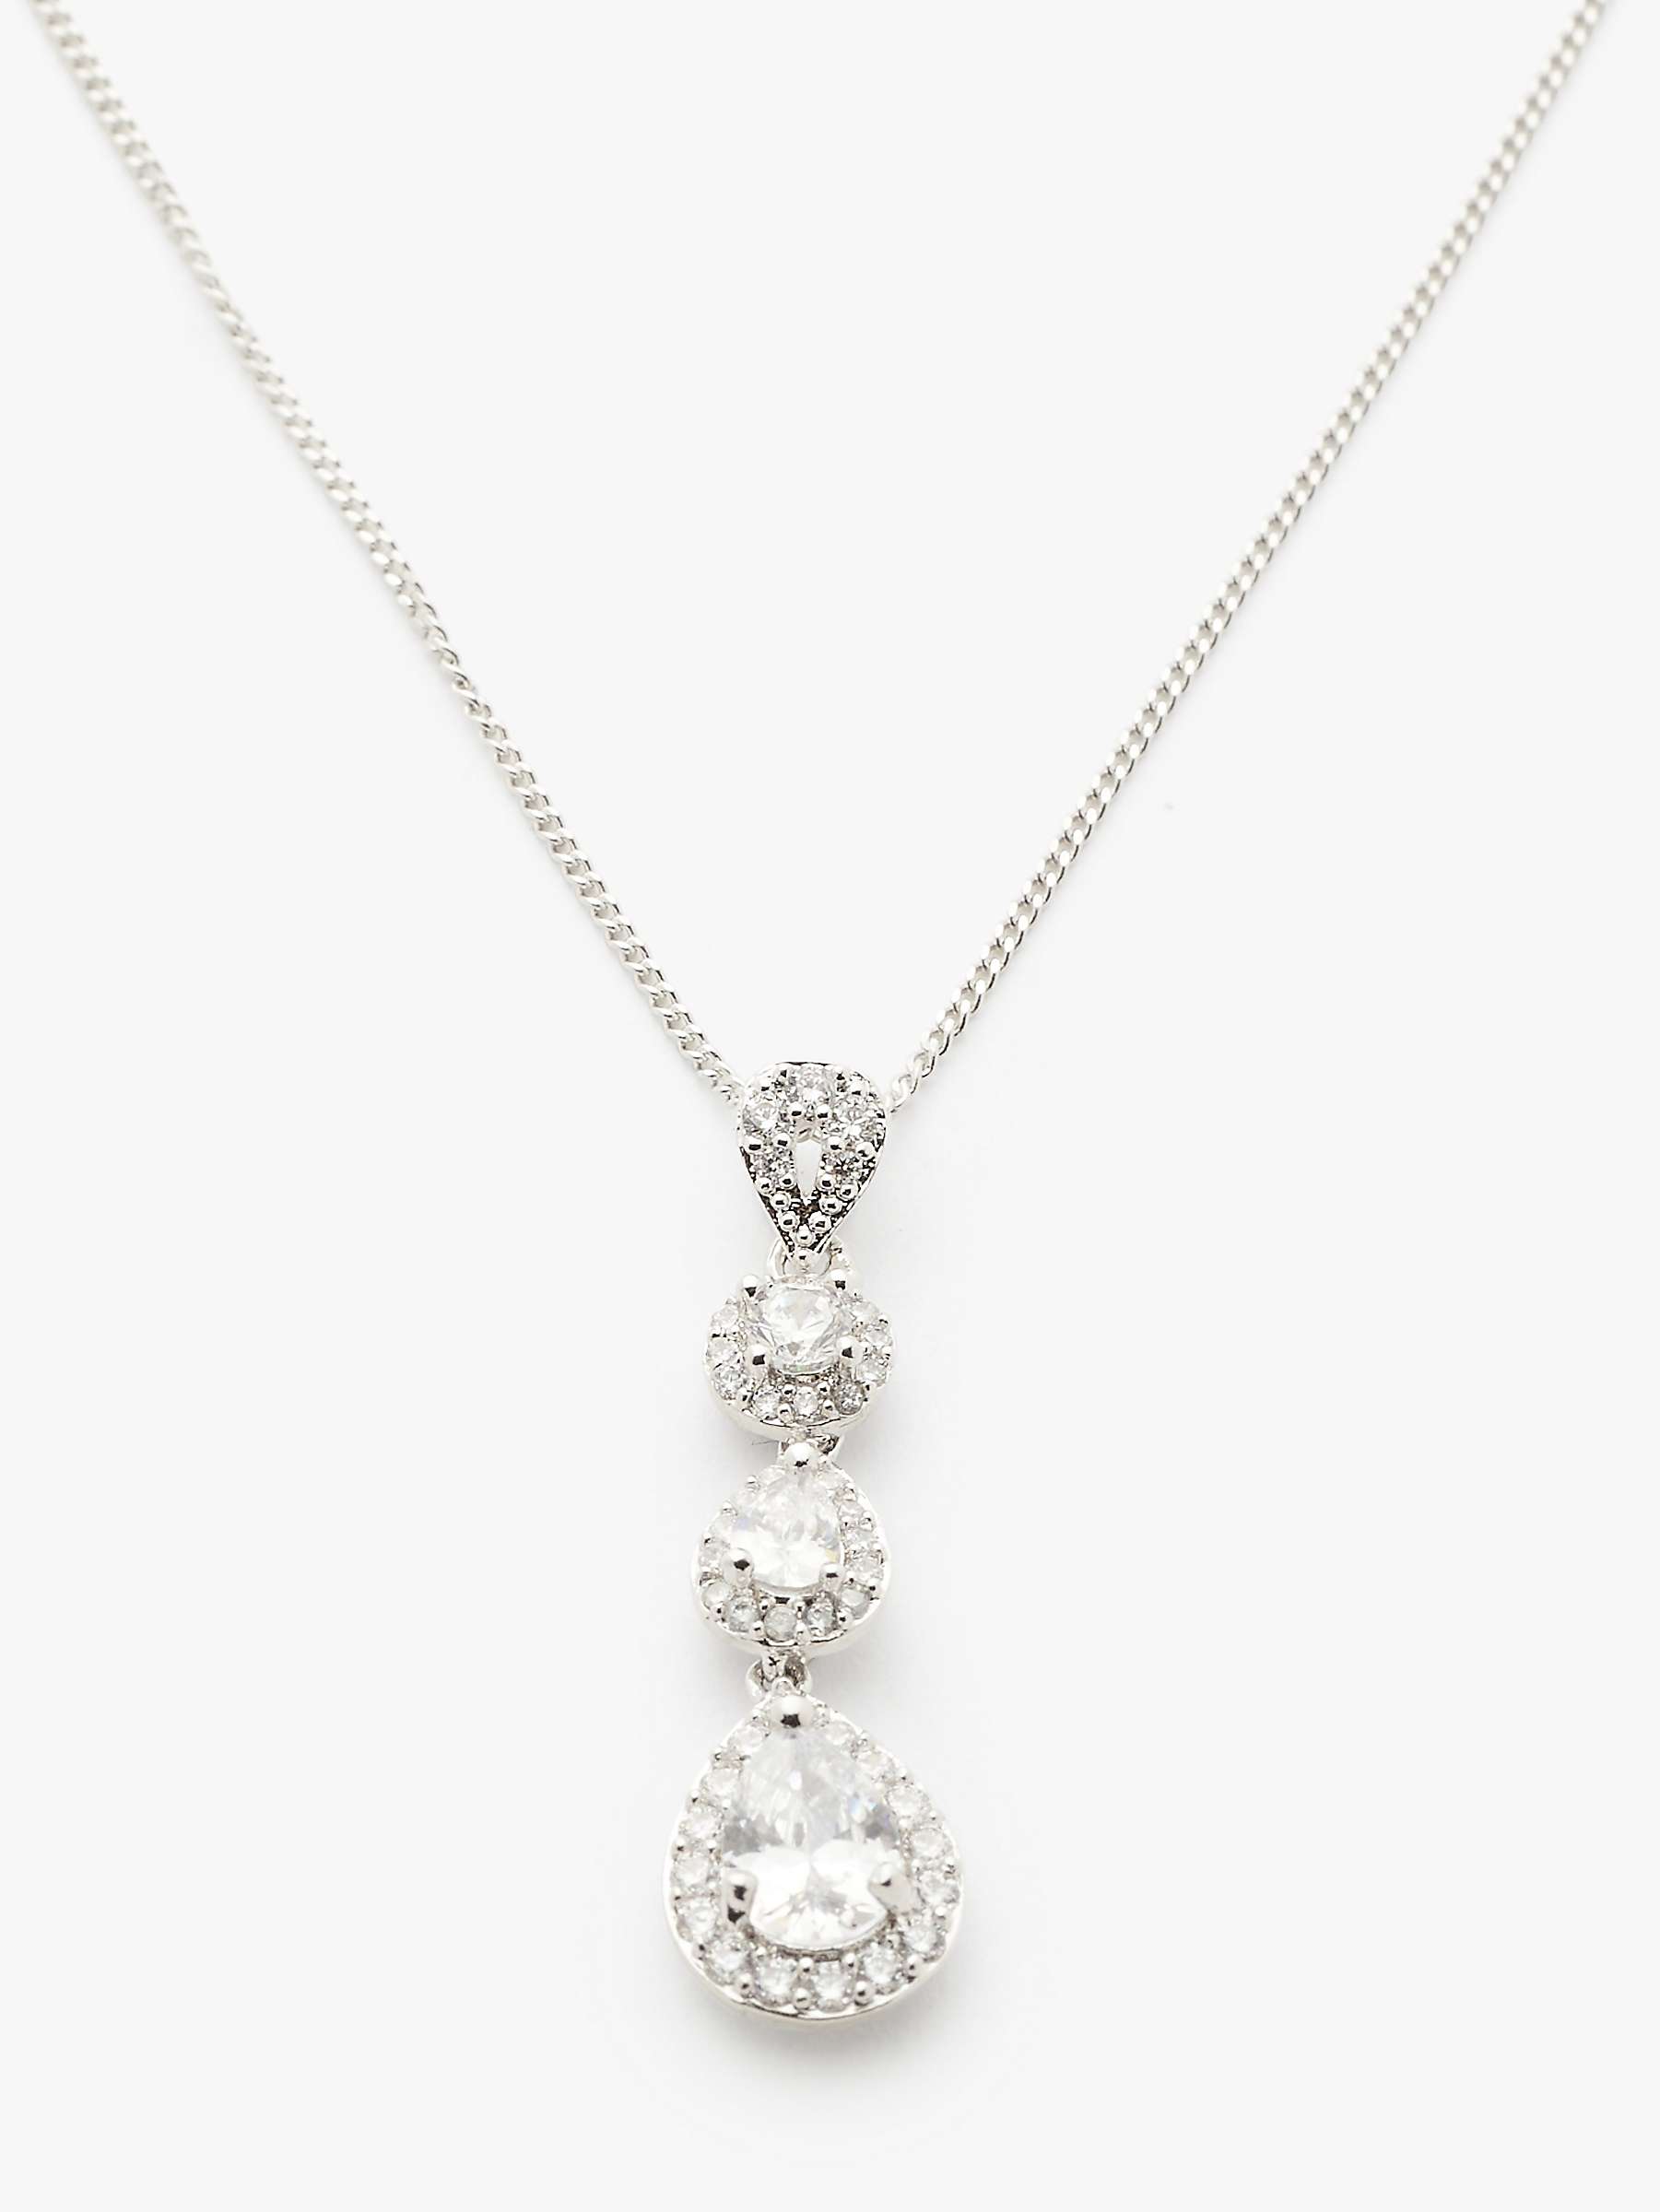 Buy Ivory & Co. Ashford Crystal Pendant Necklace, Silver Online at johnlewis.com